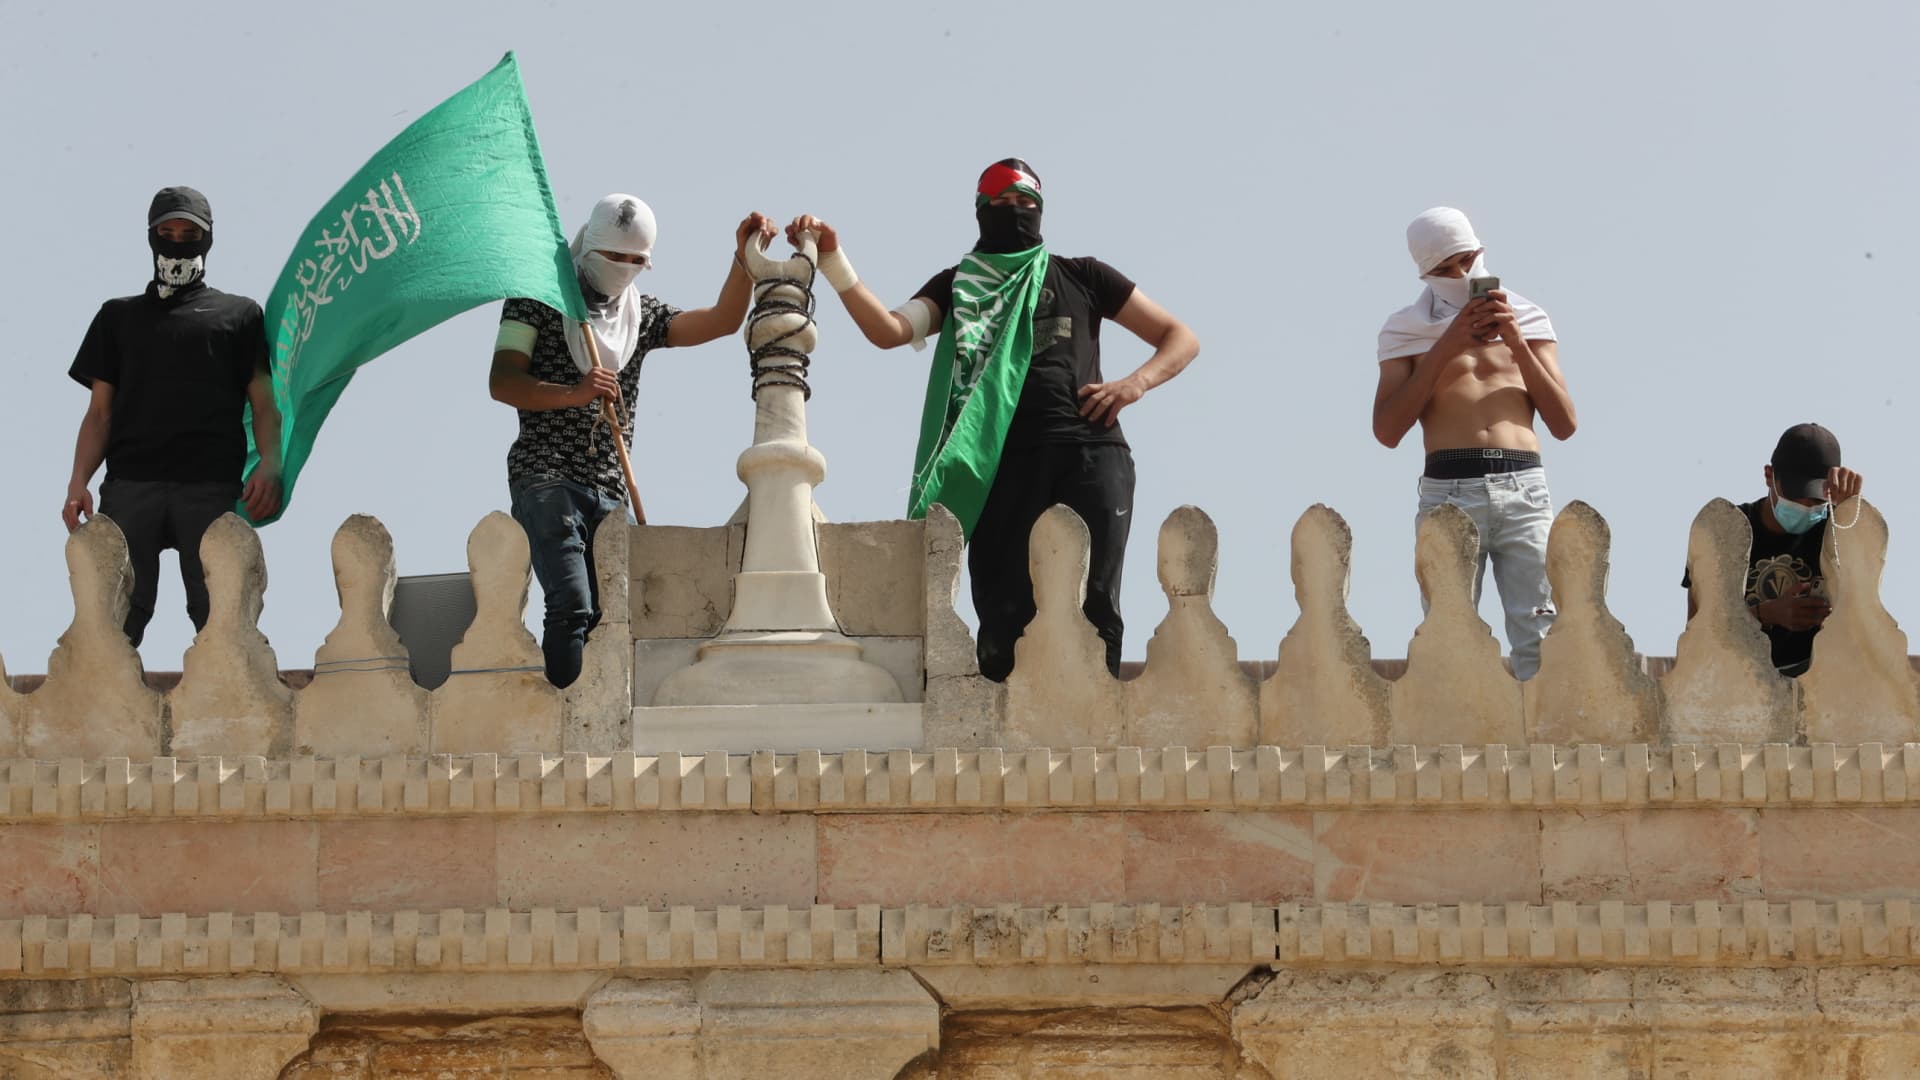 A Palestinian holds a Hamas flag atop a walk of Al-Aqsa mosque following clashes with Israeli police in Jerusalem's Old City May 10, 2021.